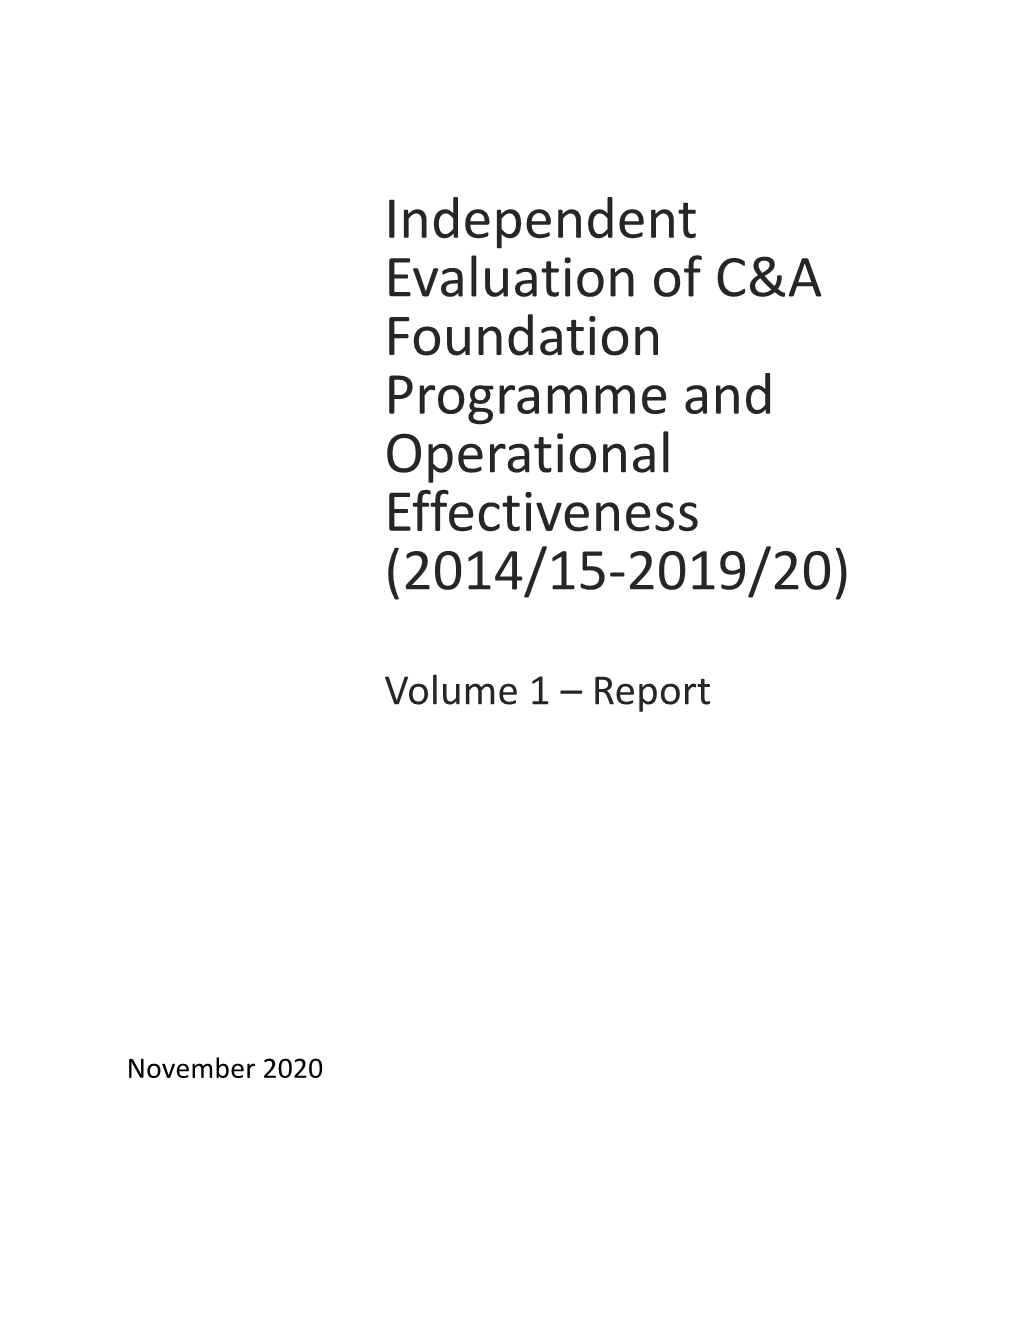 Download the Full Independent Evaluation of C&A Foundation